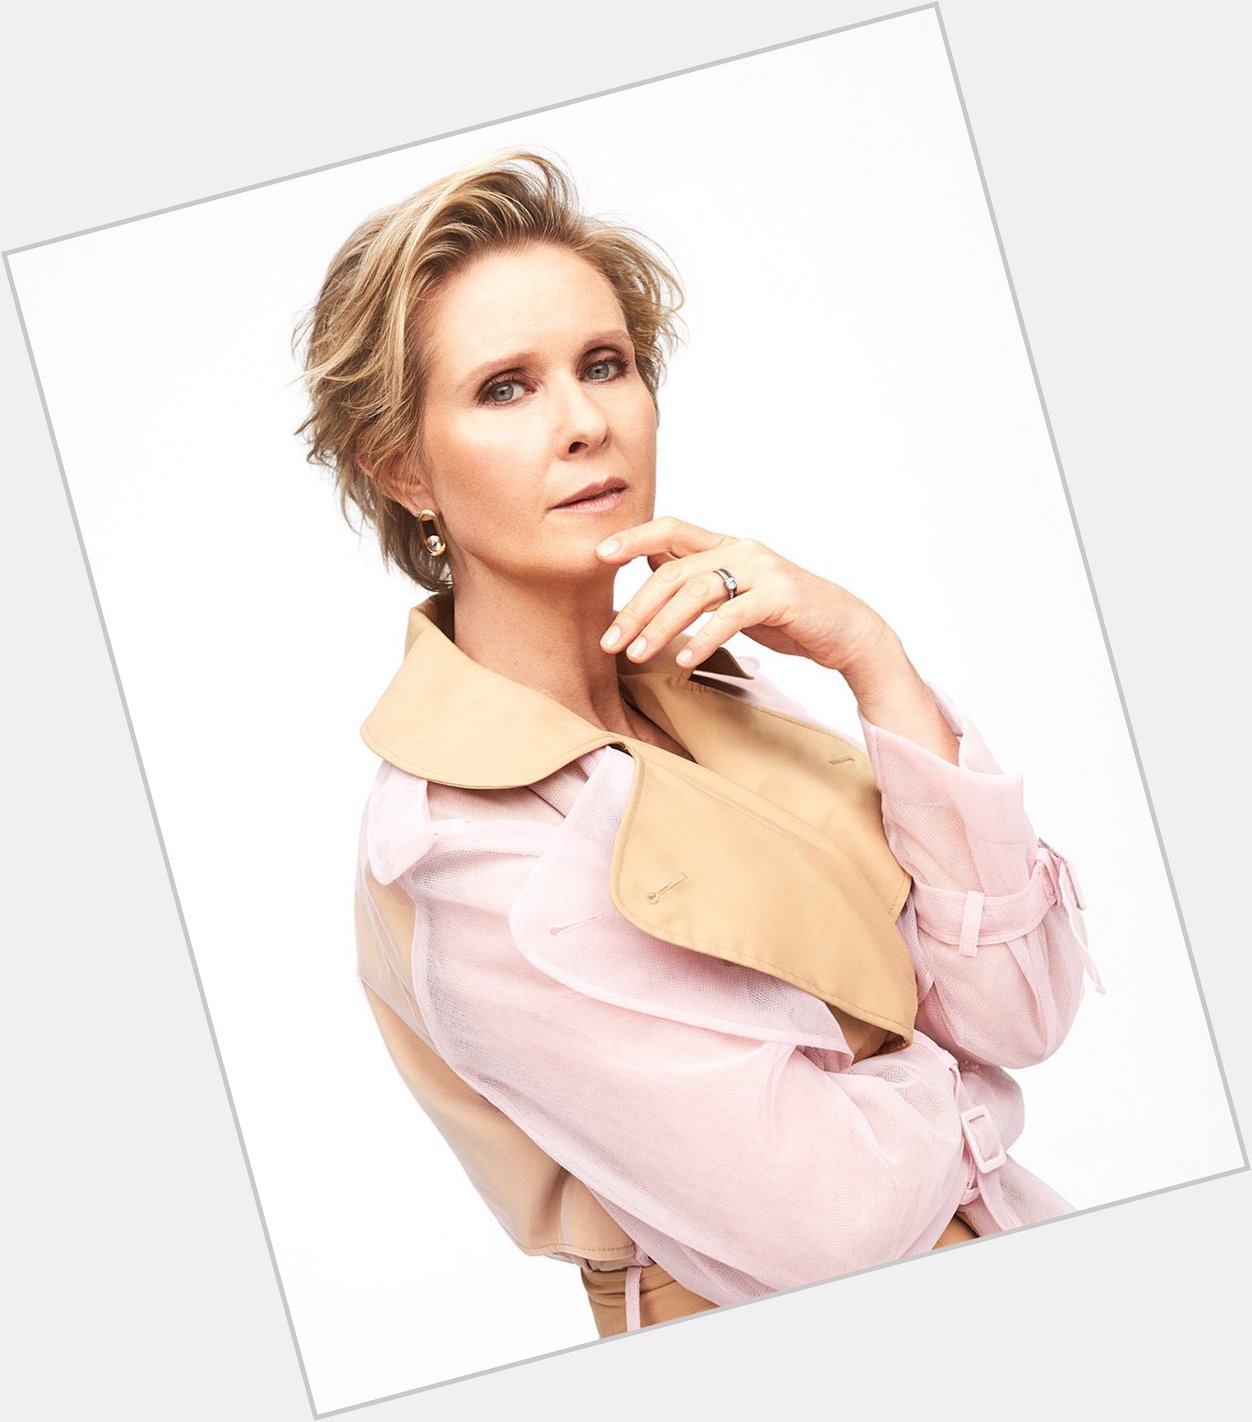 Happy birthday to this iconic and extremely talented woman, Cynthia Nixon! 